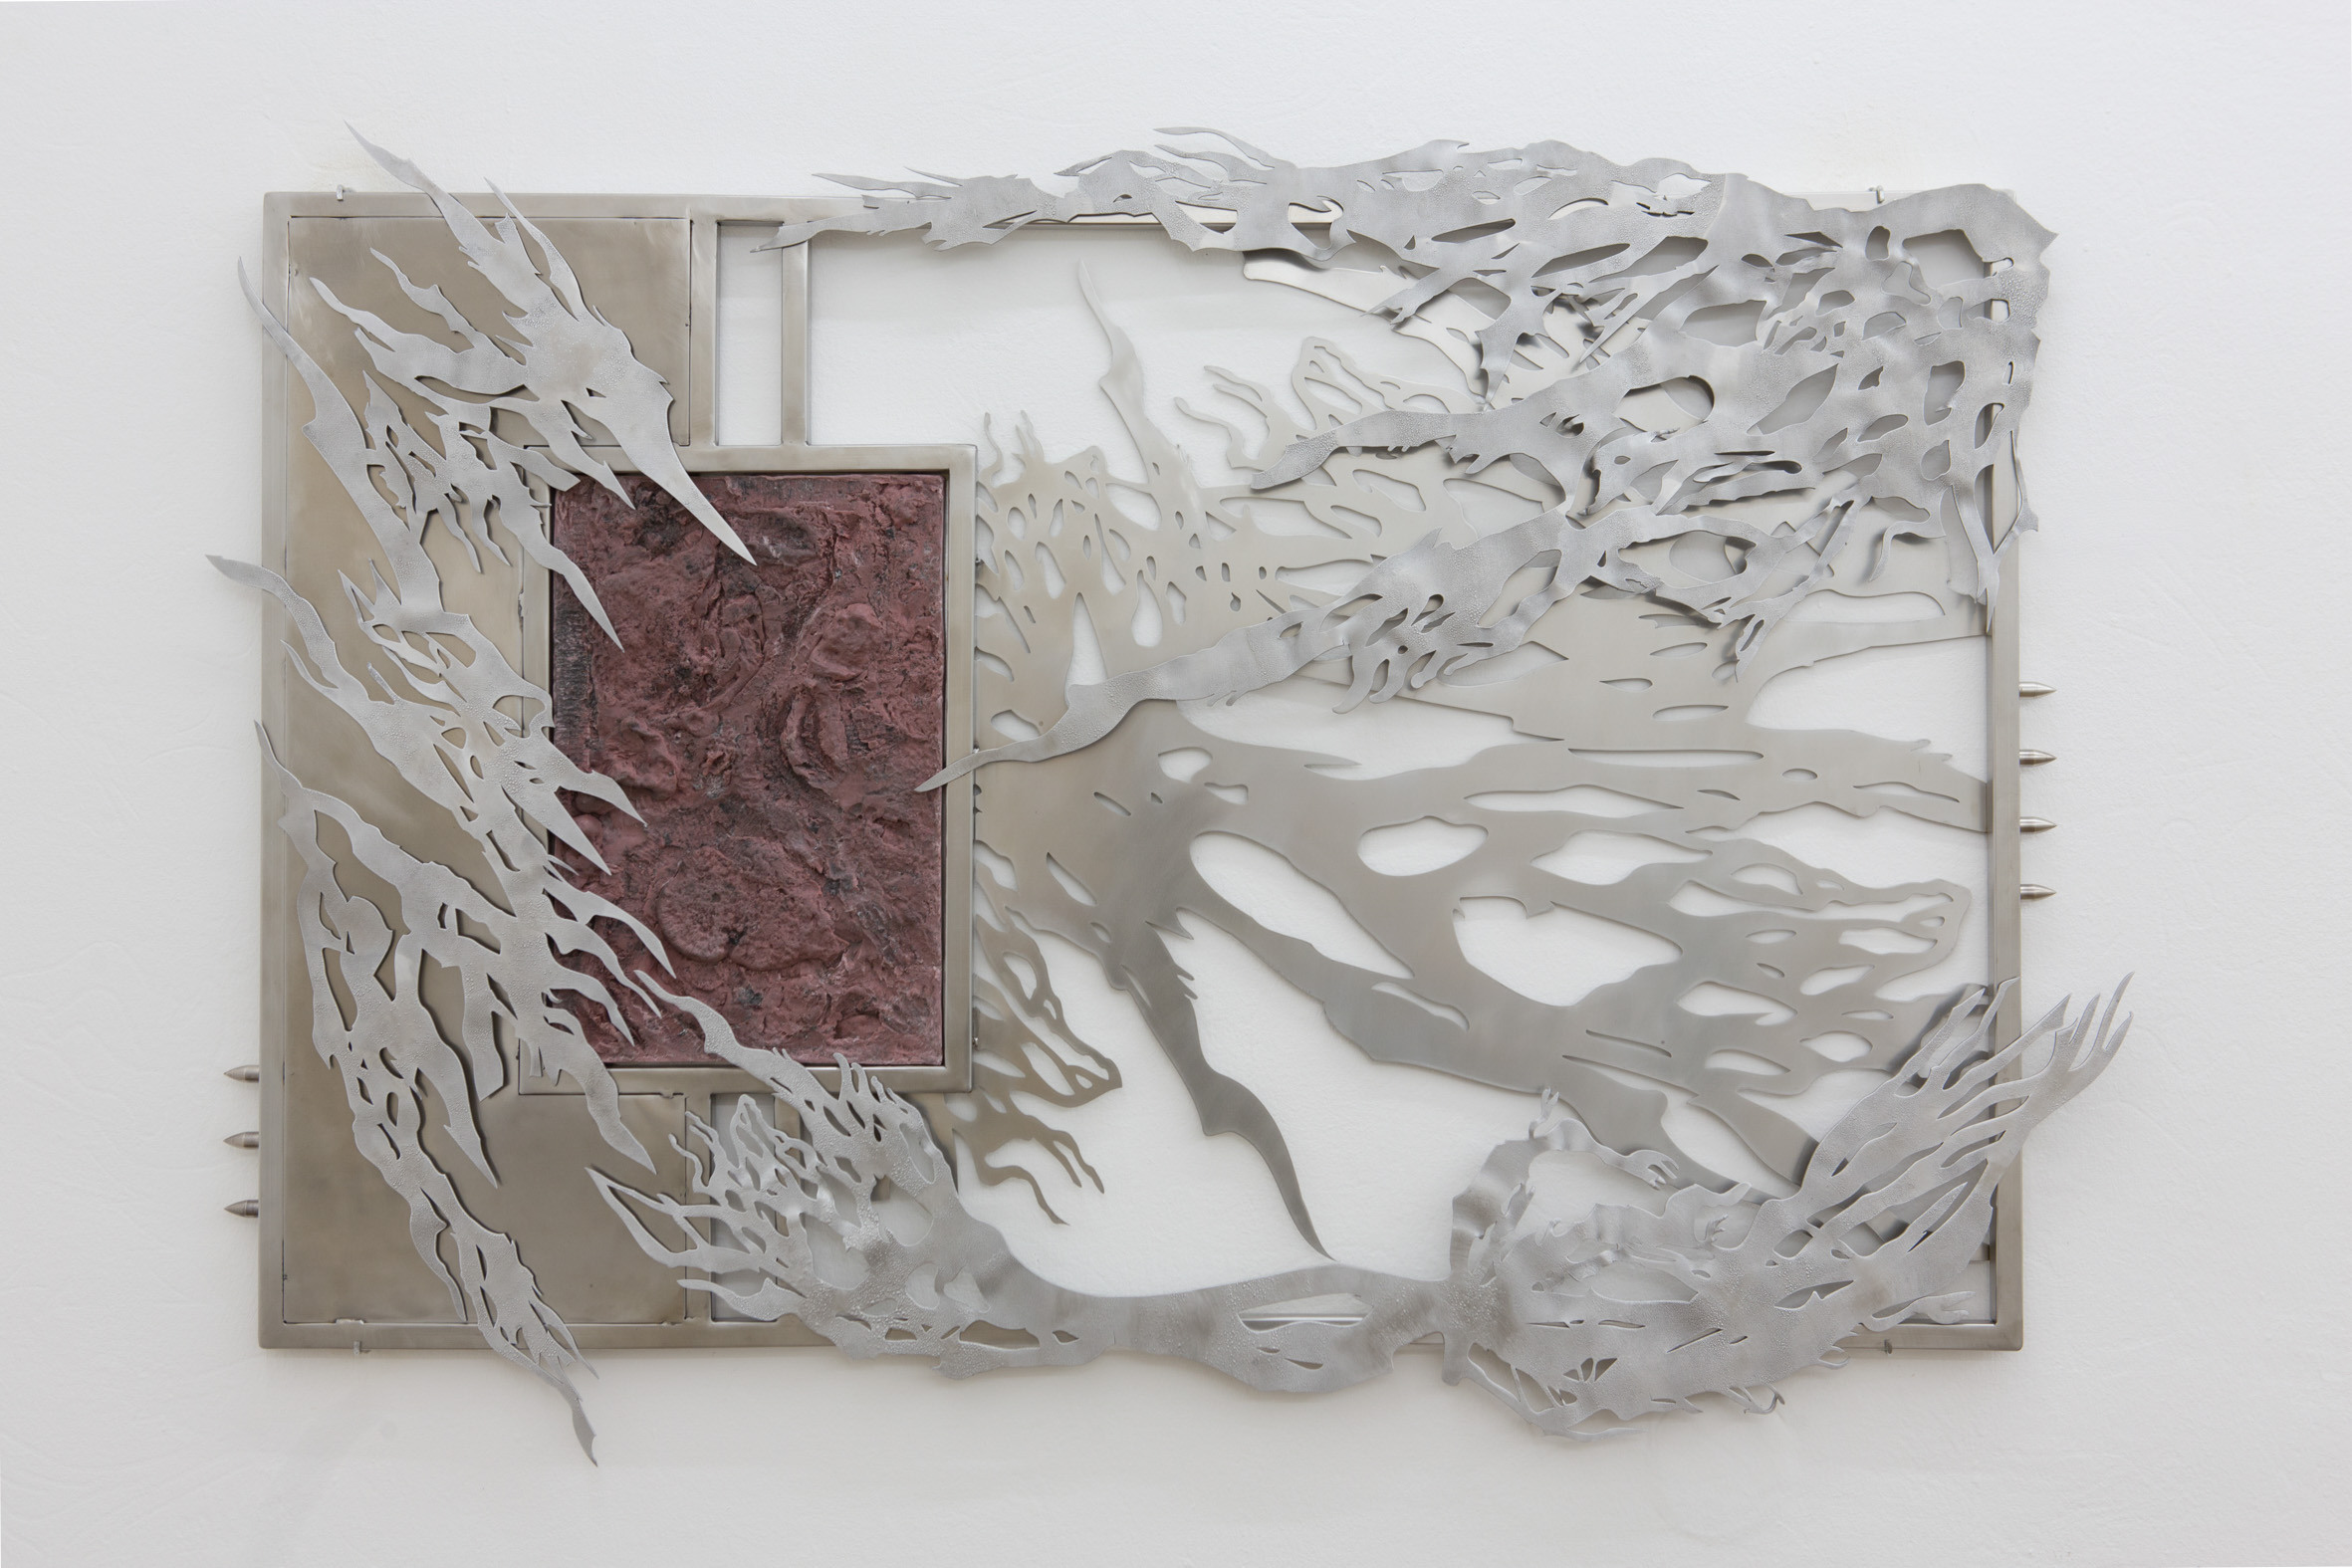 Untitled (Fossilized III), stainless steel, aluminum, resin, metal powder, 2022